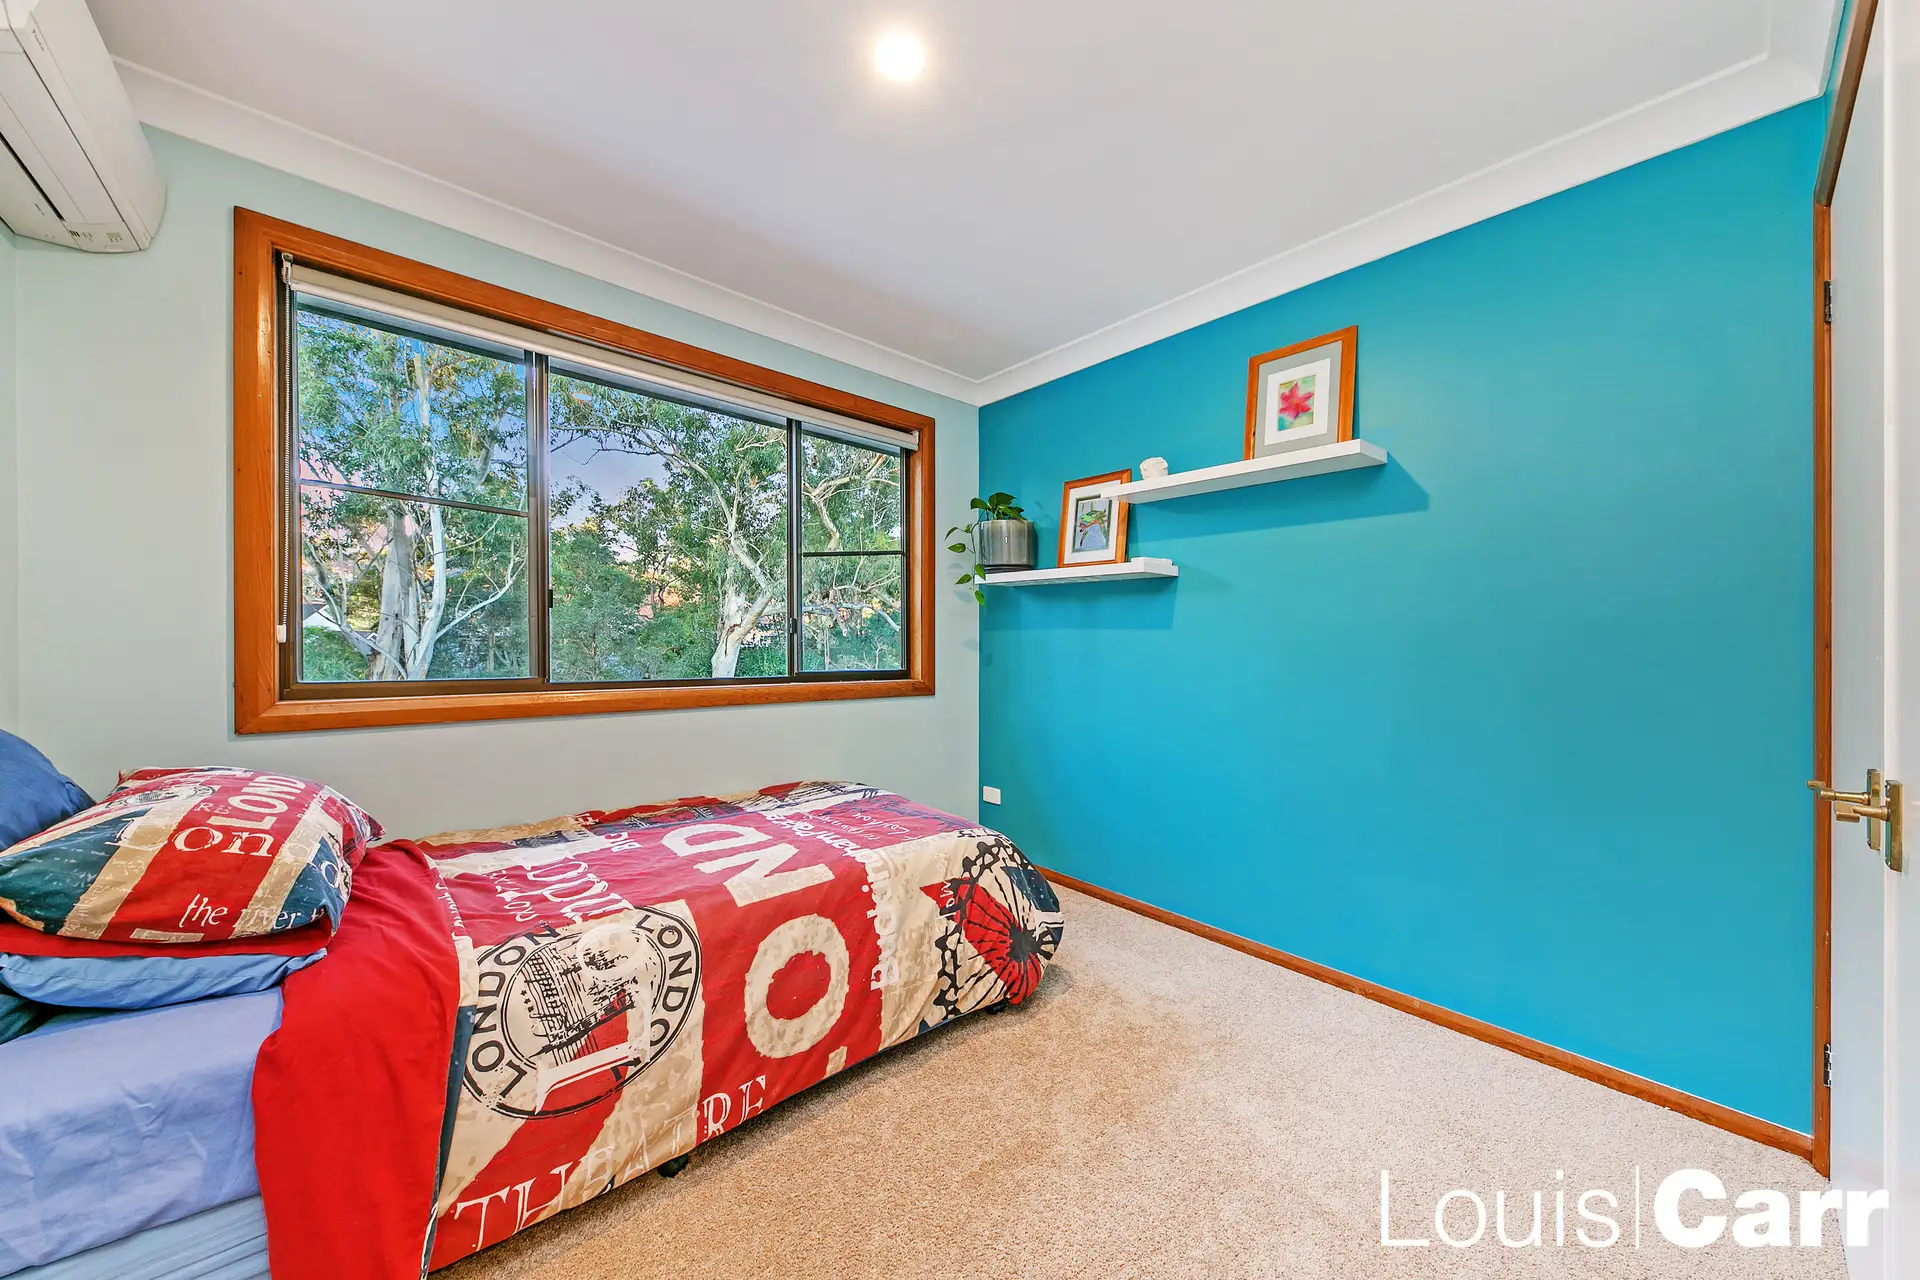 Photo #17: 13 Cairngorm Avenue, Glenhaven - Sold by Louis Carr Real Estate